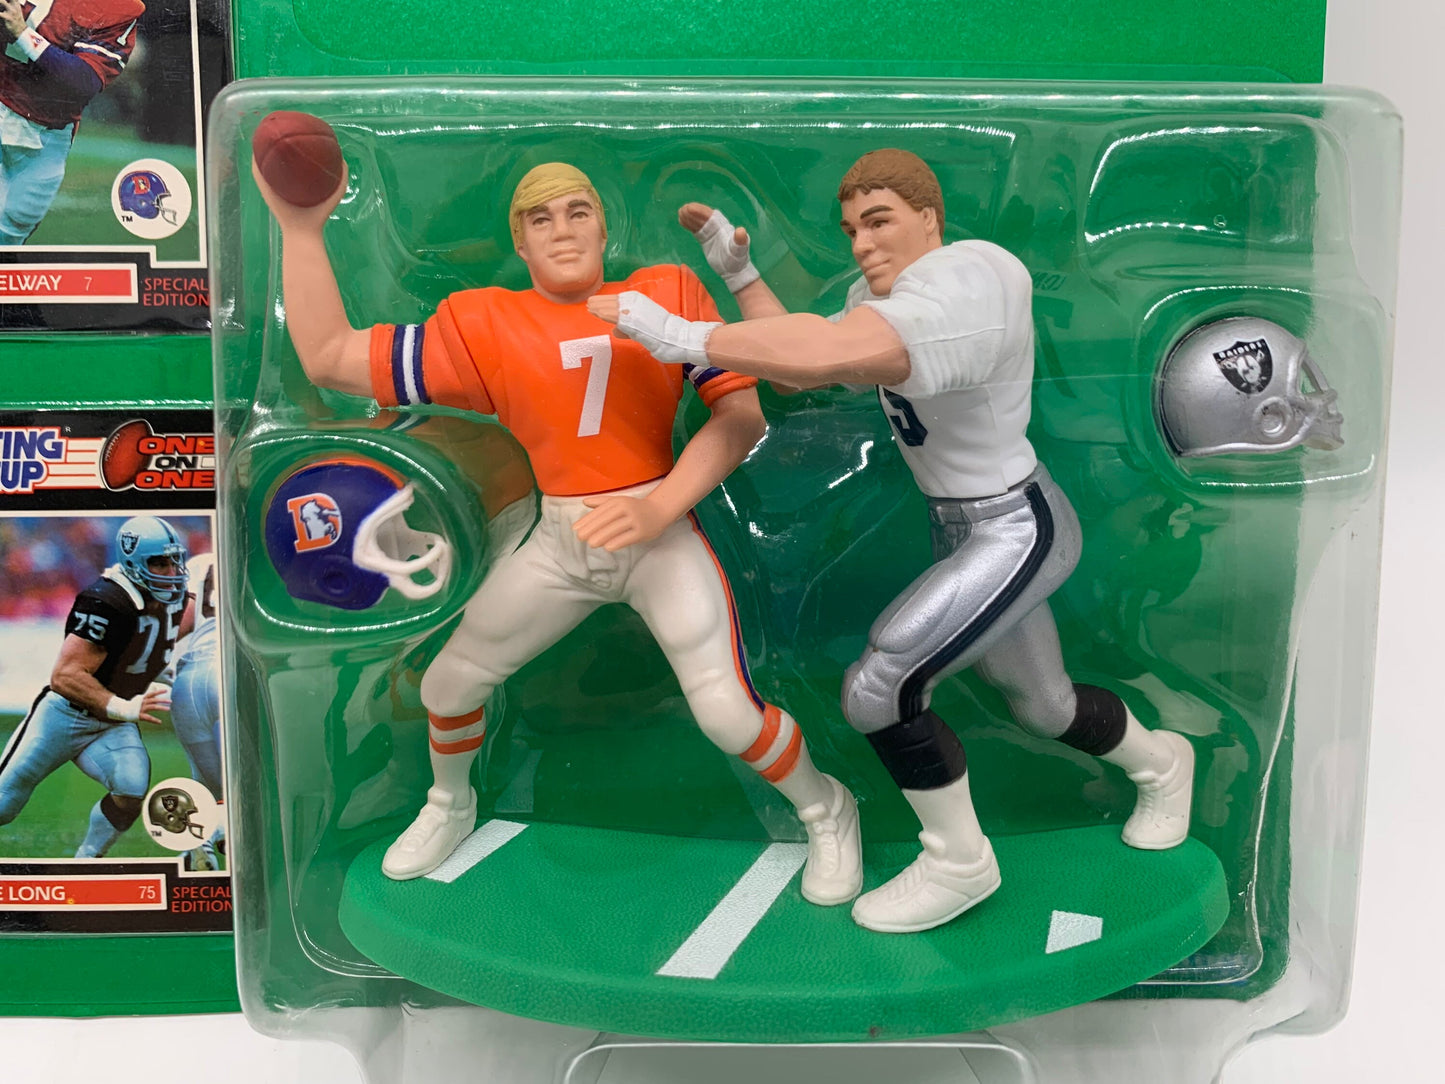 Starting Lineup John Elway Denver Broncos Howie Long Raiders Collectible NFL Action Figure Kenner Football Decor Perfect Birthday Gift